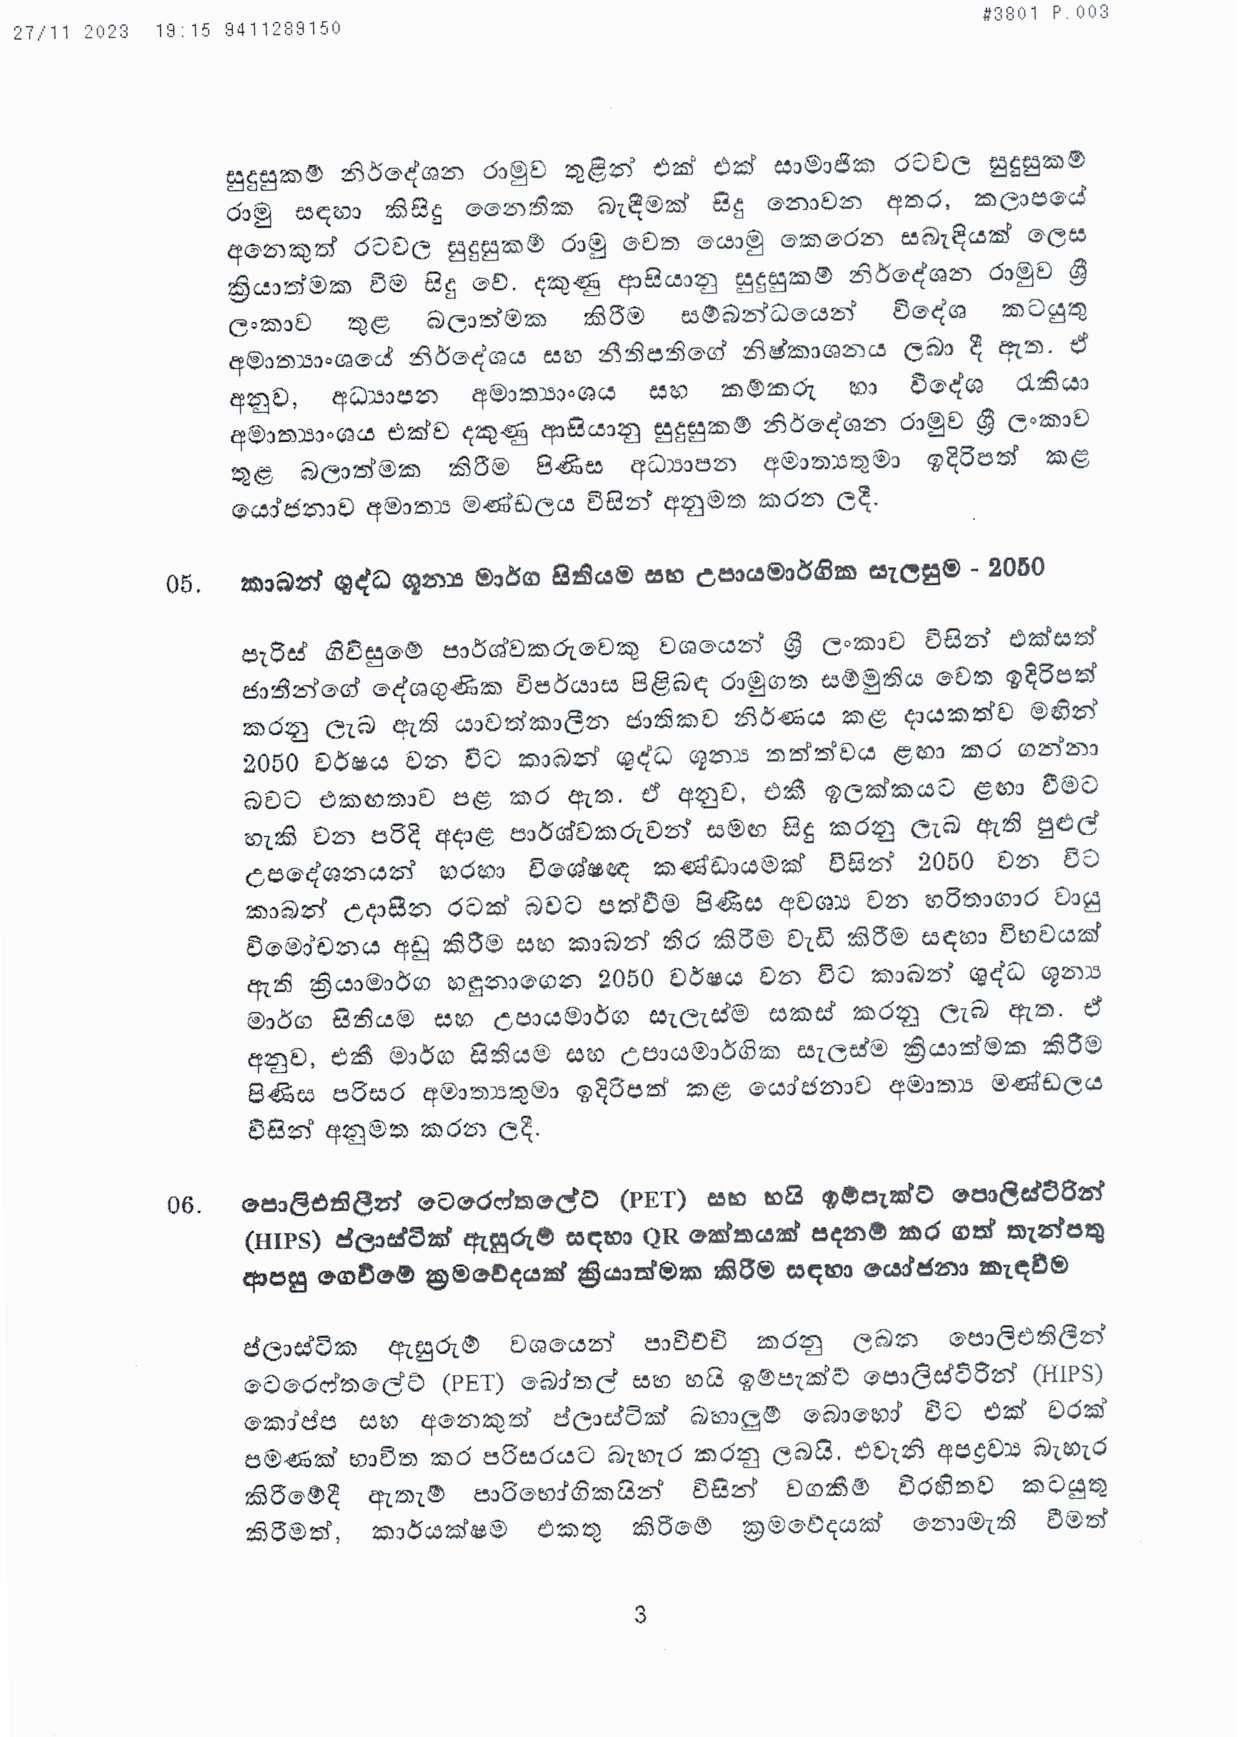 Cabinet Decision on 27.11.2023 page 003